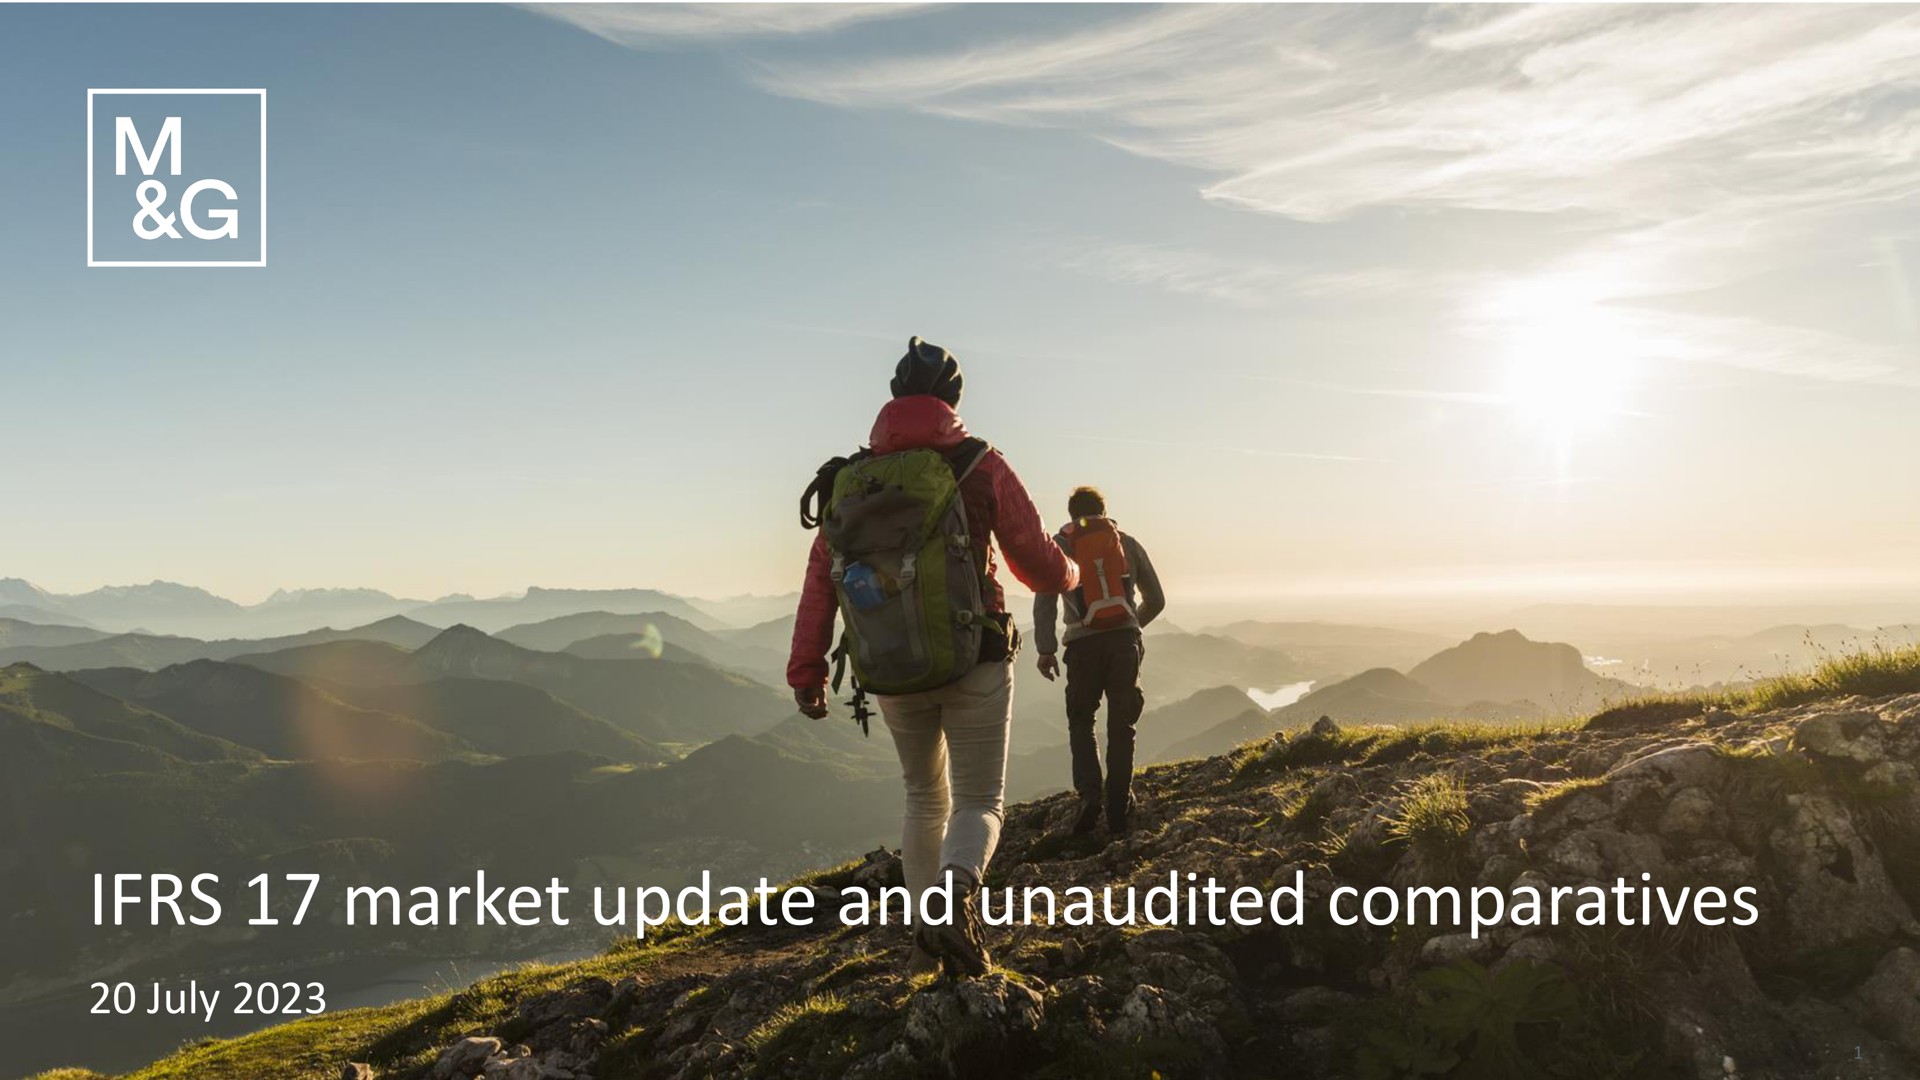 market update and unaudited comparatives | M&G